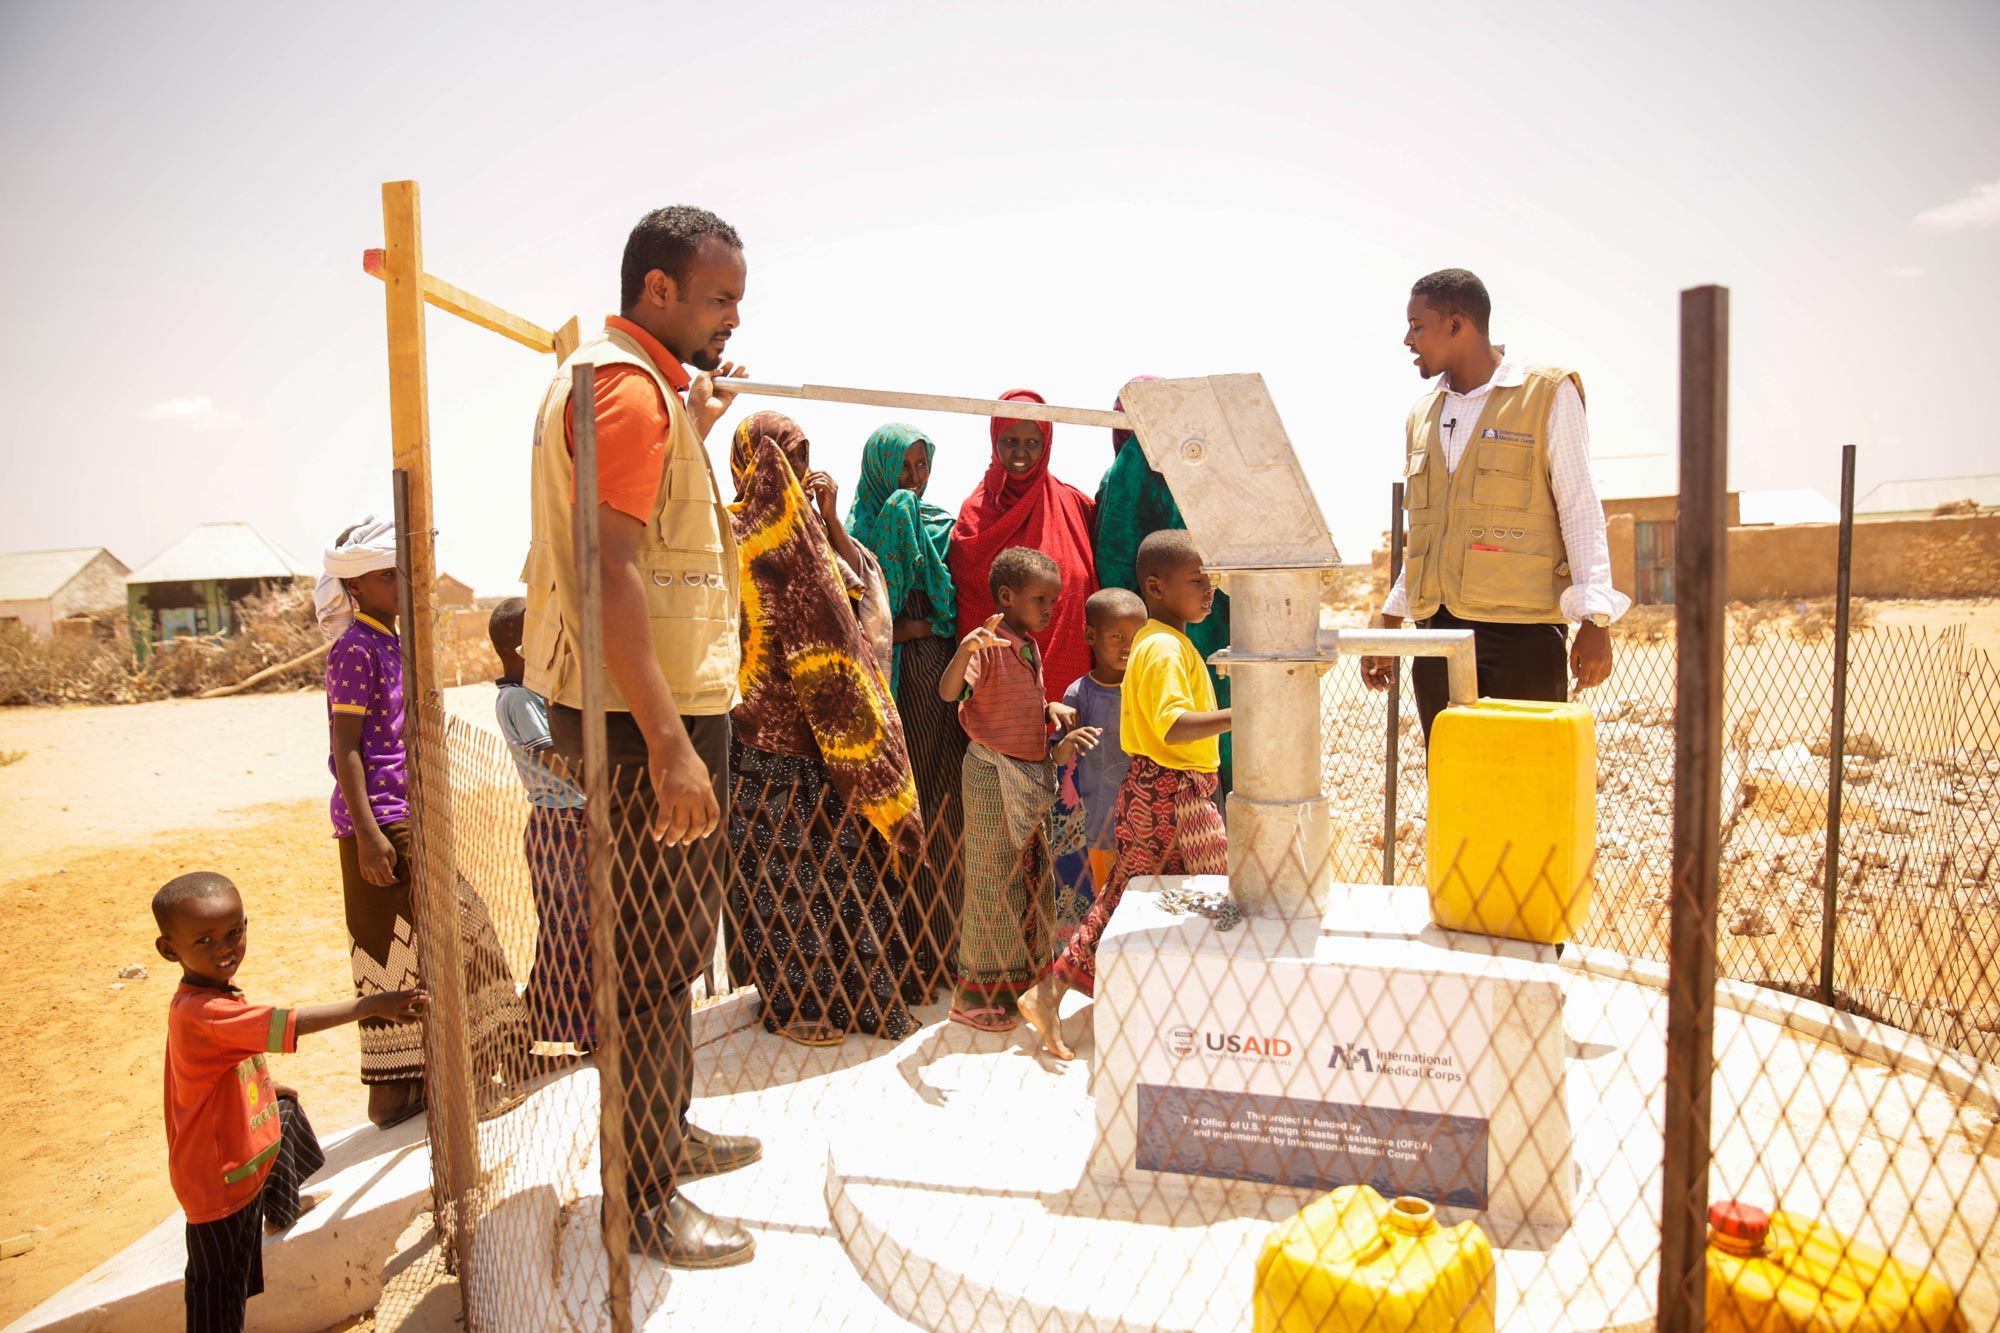 A Simple Recipe for Bringing New Life to Drought-Stricken Somali Villages: Add Water | International Medical Corps